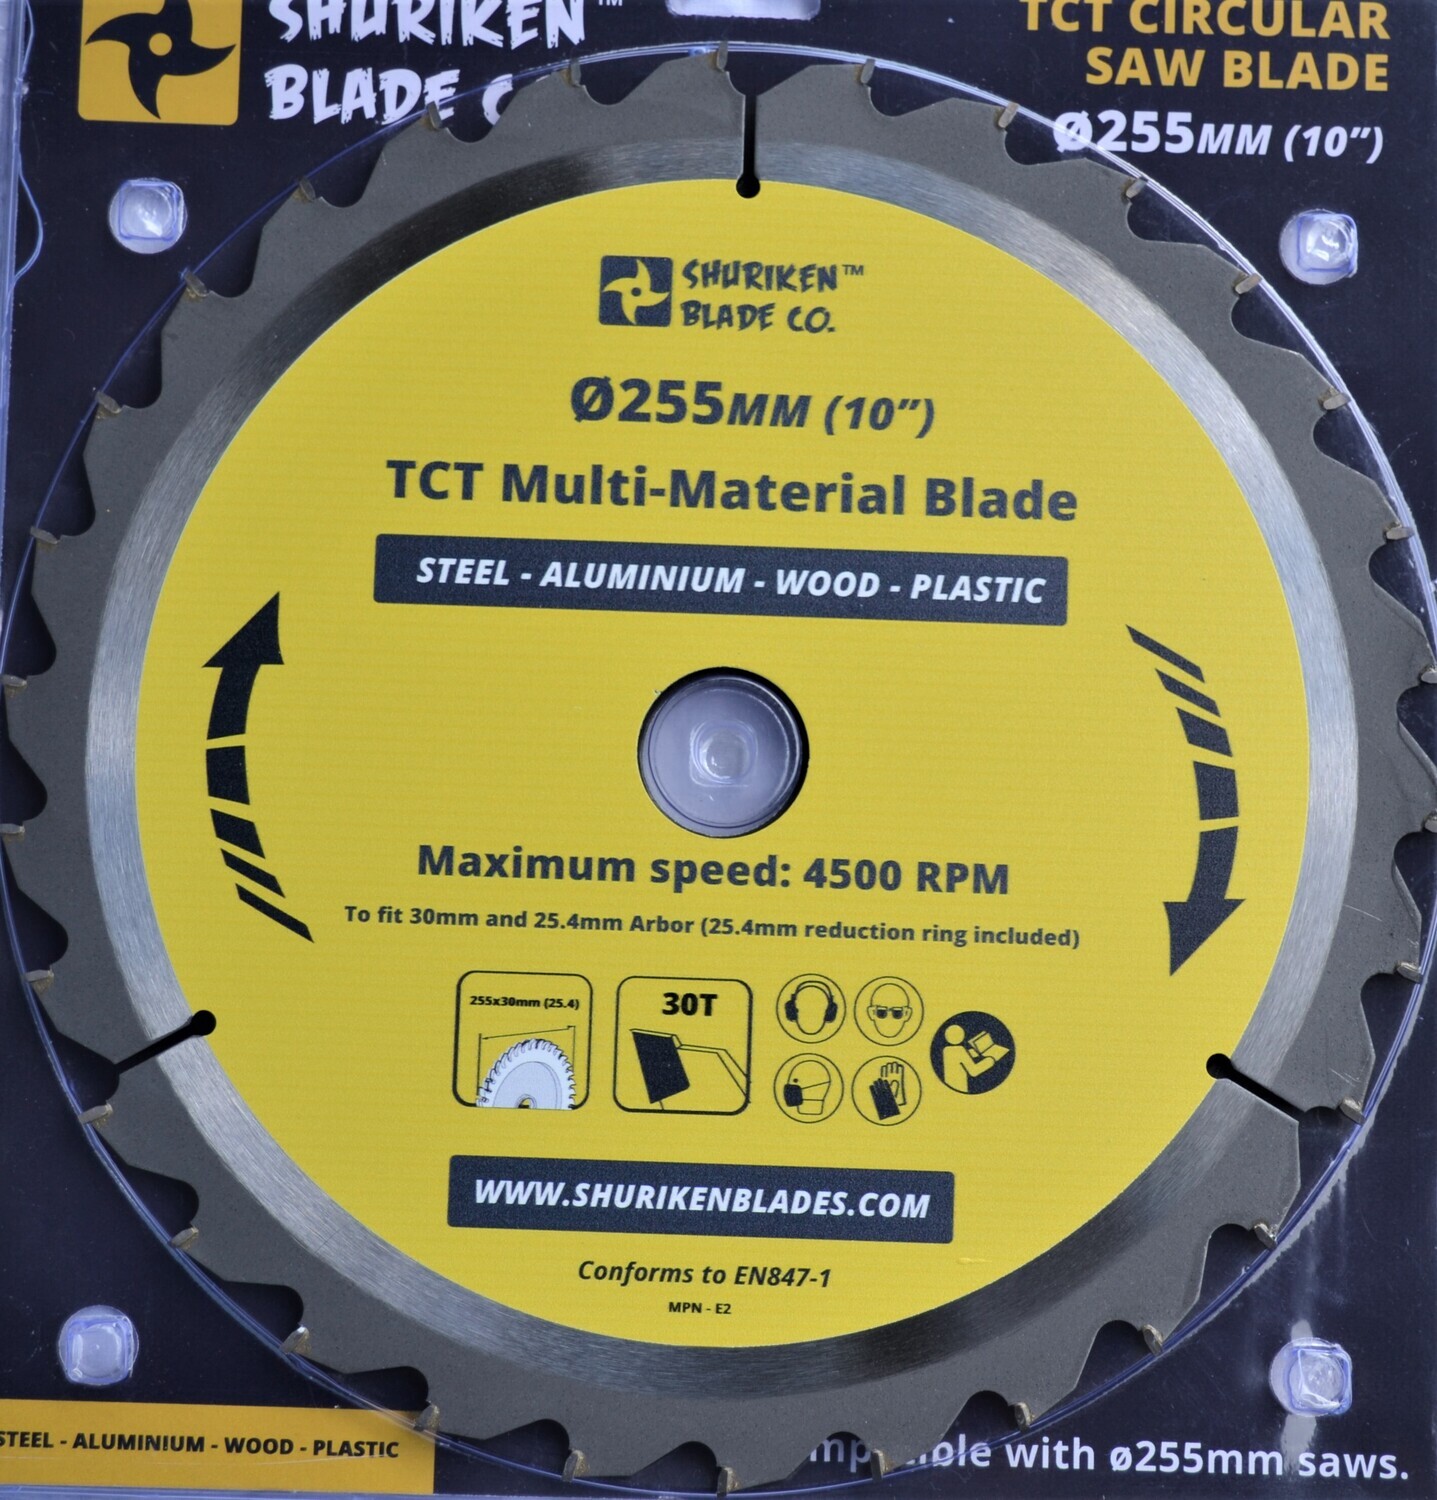 250mm x 80T Silver High-speed TCT Circular Saw Blade 30mm Bore For 255mm Saws ！ 